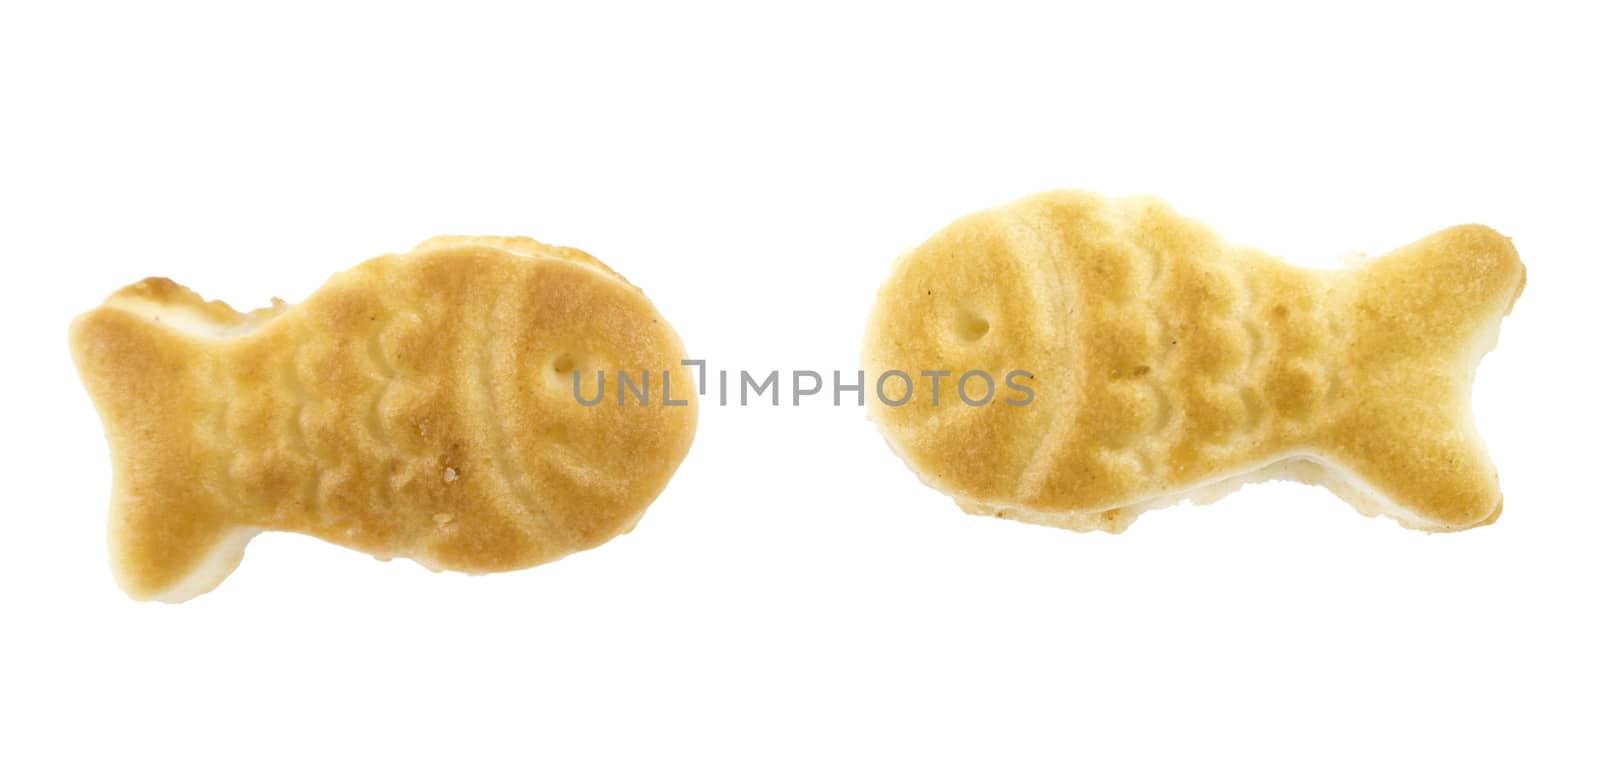 salted cookies stack on white background.